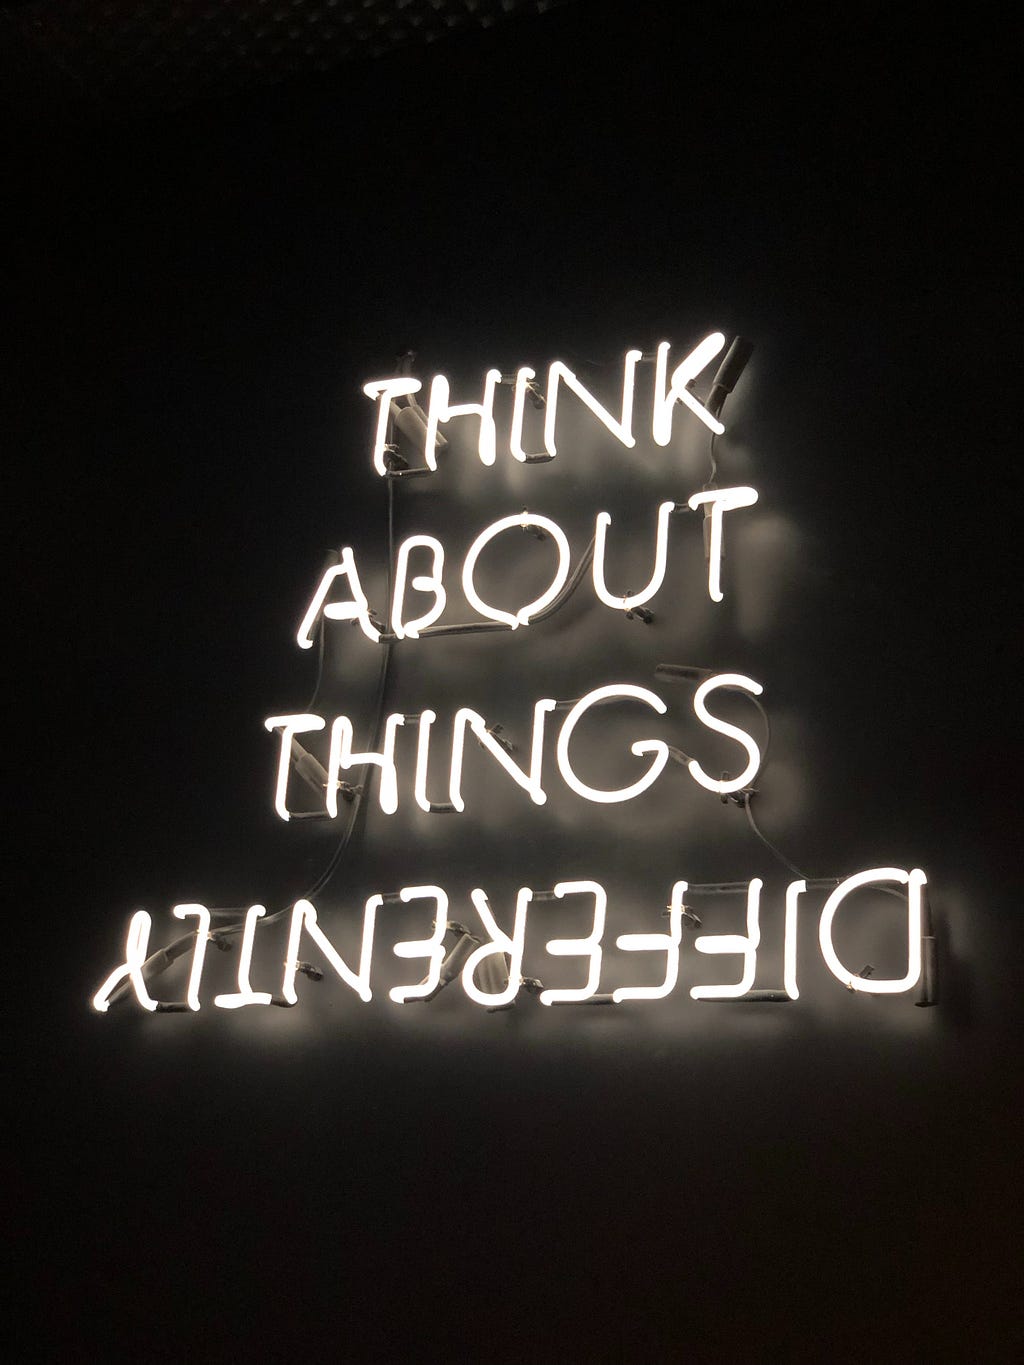 Neon lights showing “Think about thinks Differently” (Differently is written upside down)